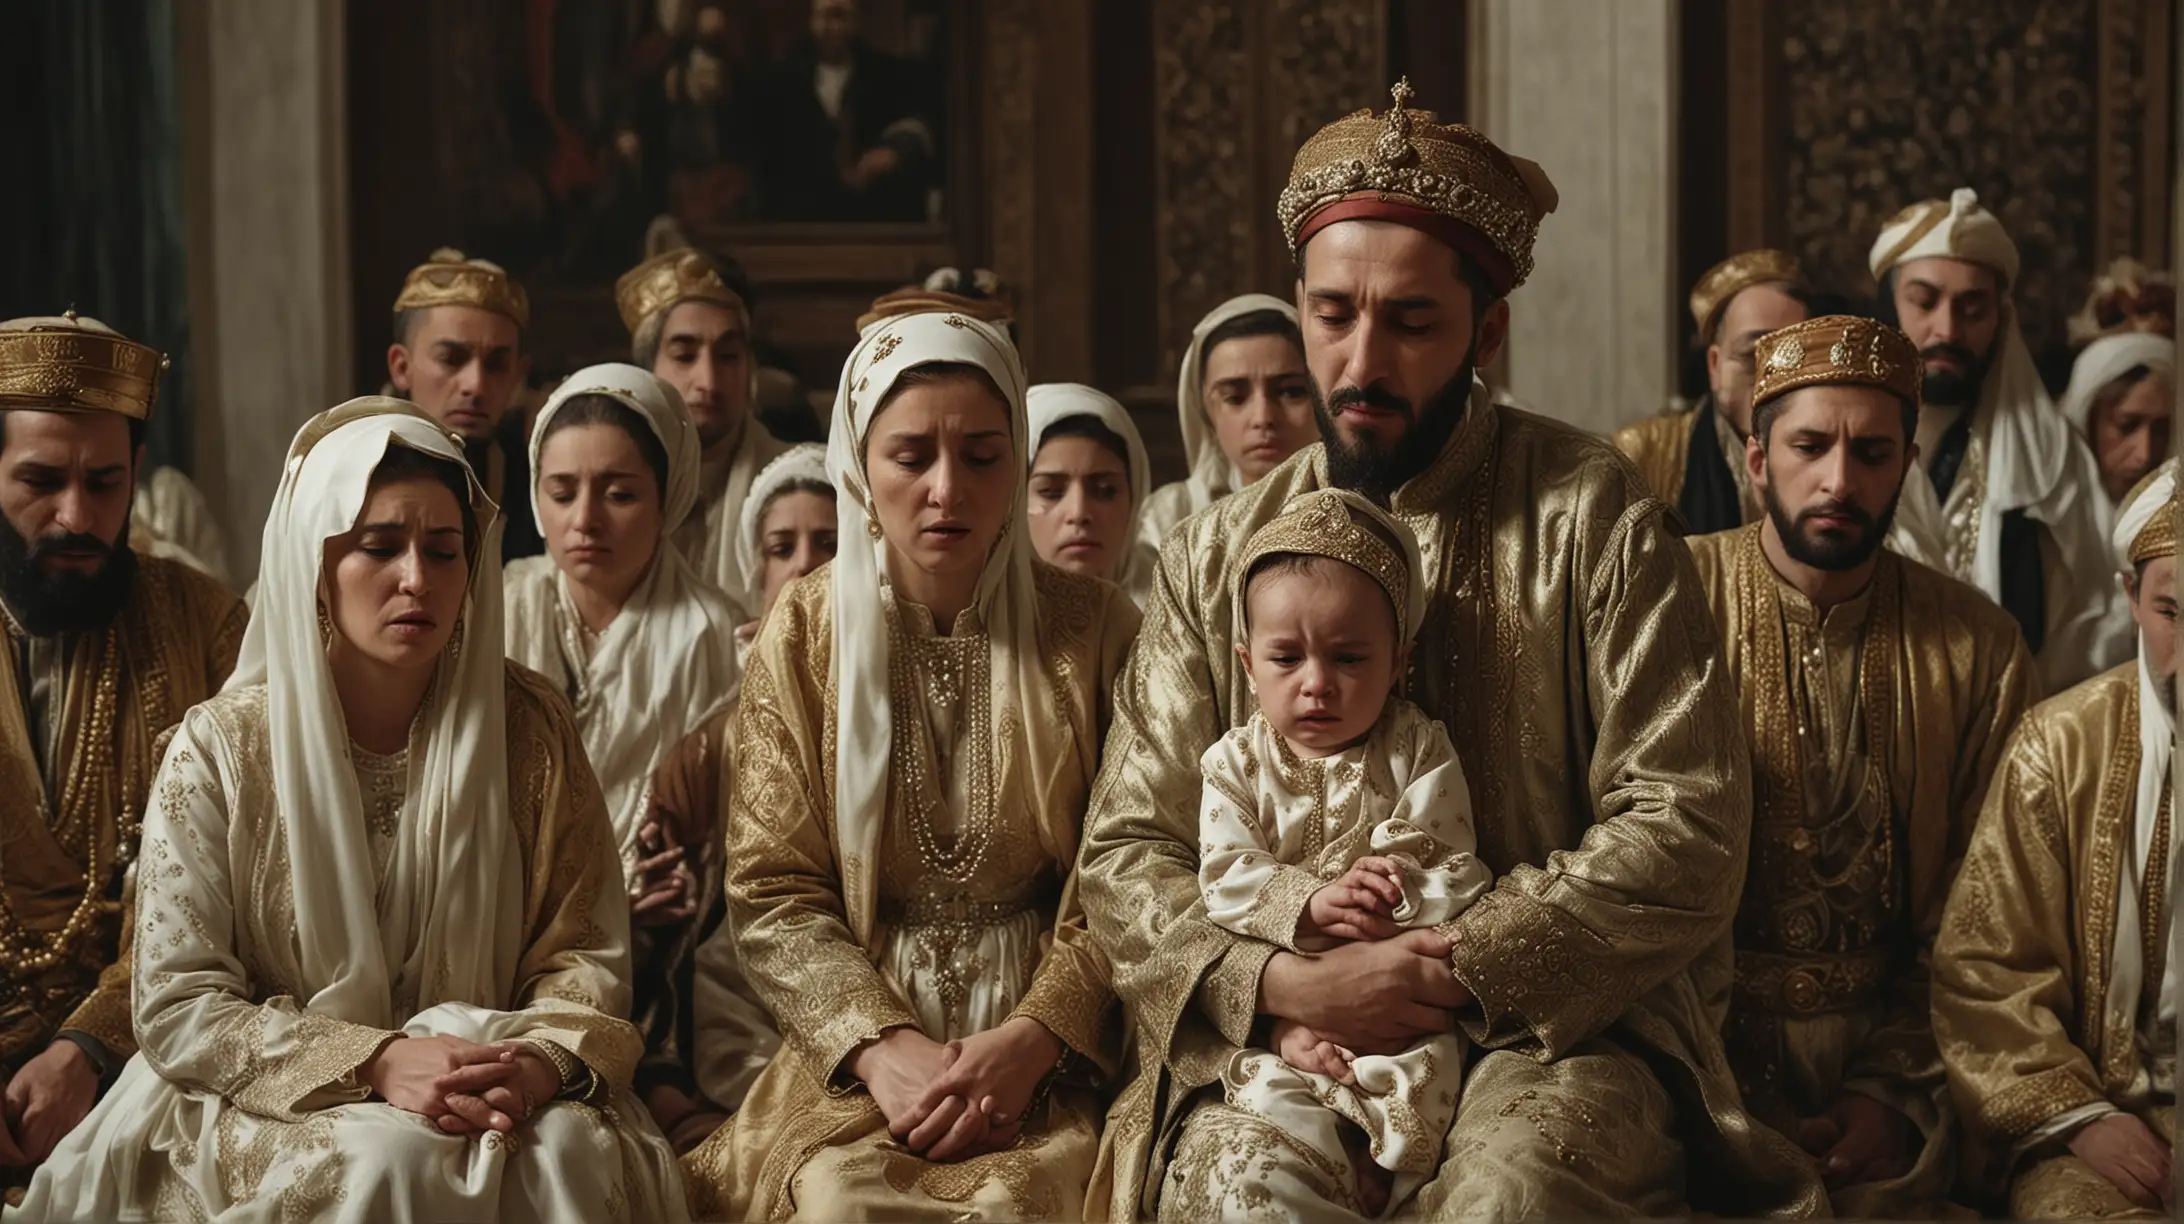 Amidst the backdrop of political turmoil, members of Sultan Suleiman's family are depicted in a moment of profound grief, their faces contorted in sorrow as they sob and hold their babies close. The innocence of the infants juxtaposes the somber atmosphere, highlighting the human toll of power struggles within the royal household. This poignant scene captures the heartbreak and anguish experienced by loved ones caught in the crossfire of dynastic ambition, reminding viewers of the personal tragedies that often accompany the pursuit of power.
Hyper realistic